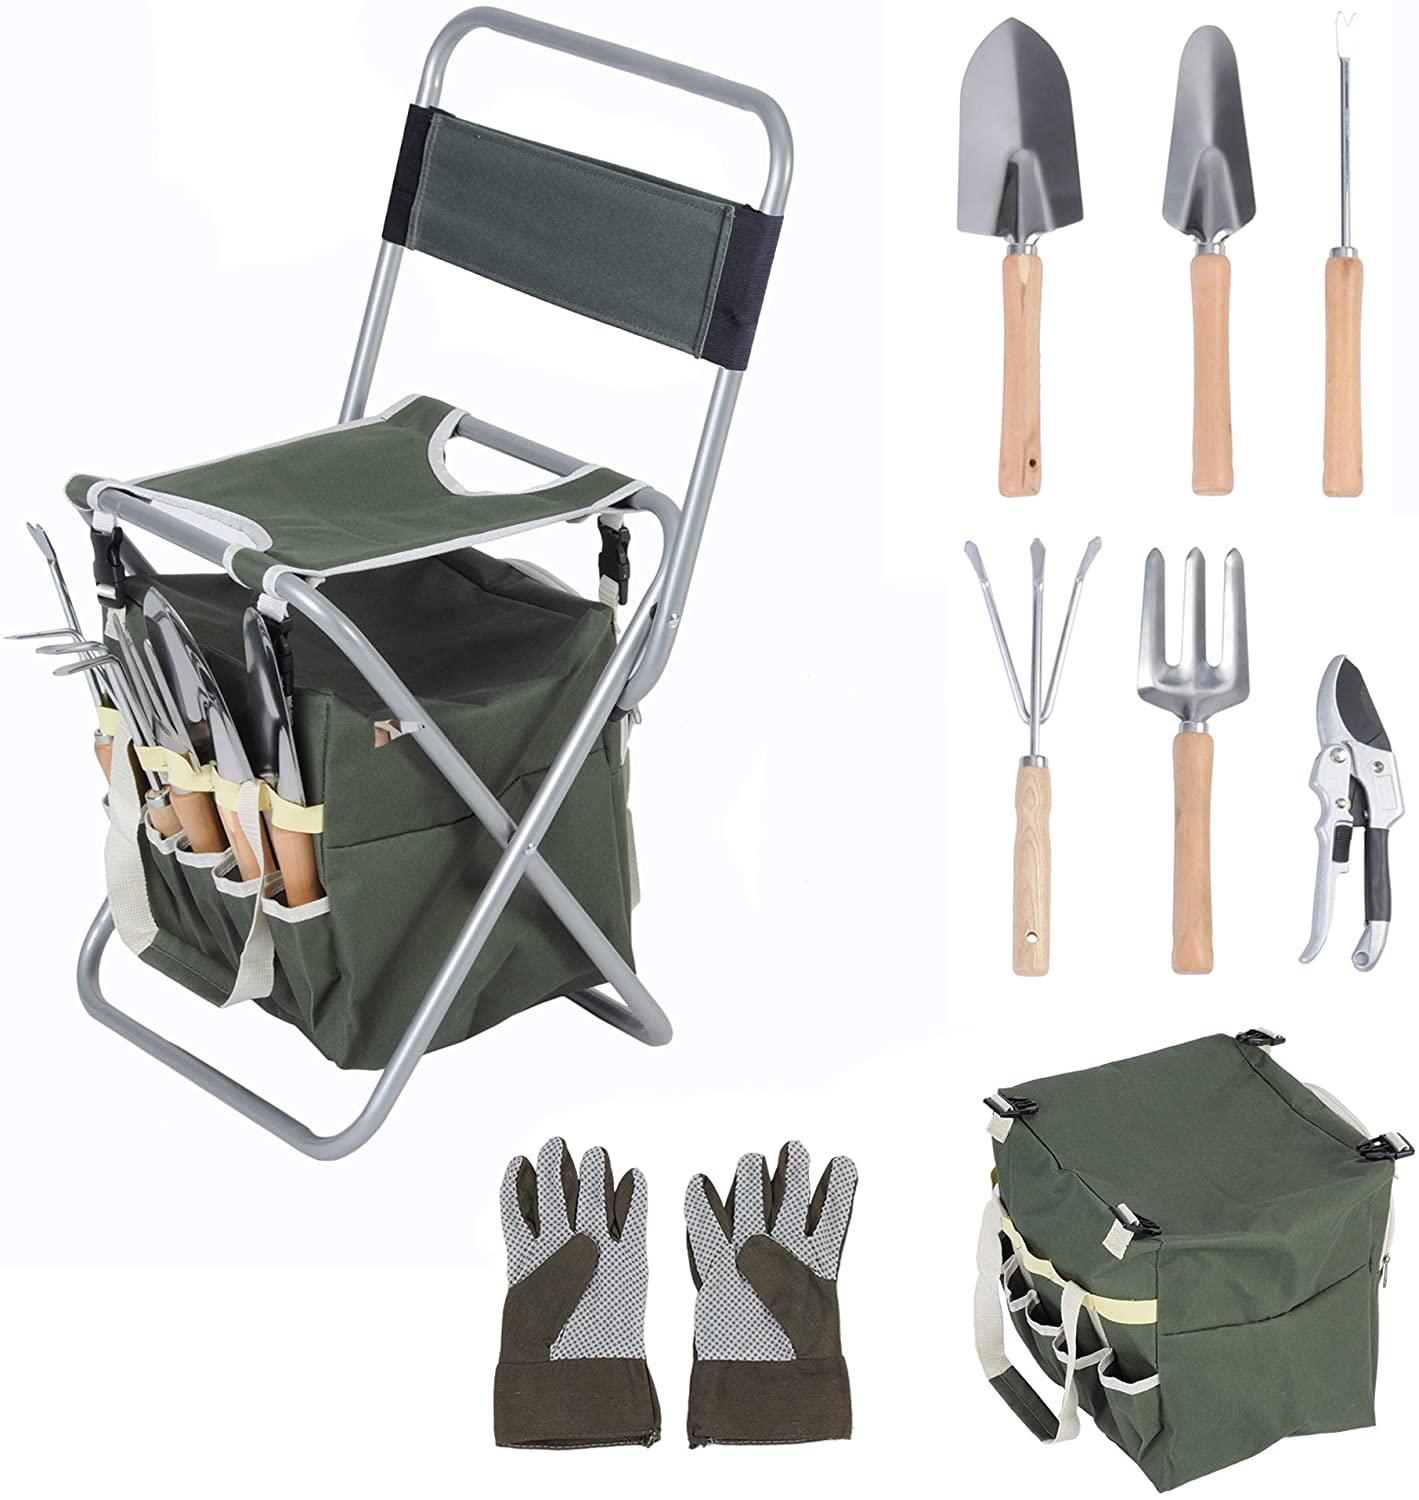 9 PCS Garden Tools Set Ergonomic Wooden Handle Sturdy Stool with Detachable Tool Kit Perfect for Different Kinds of Gardening - Bosonshop